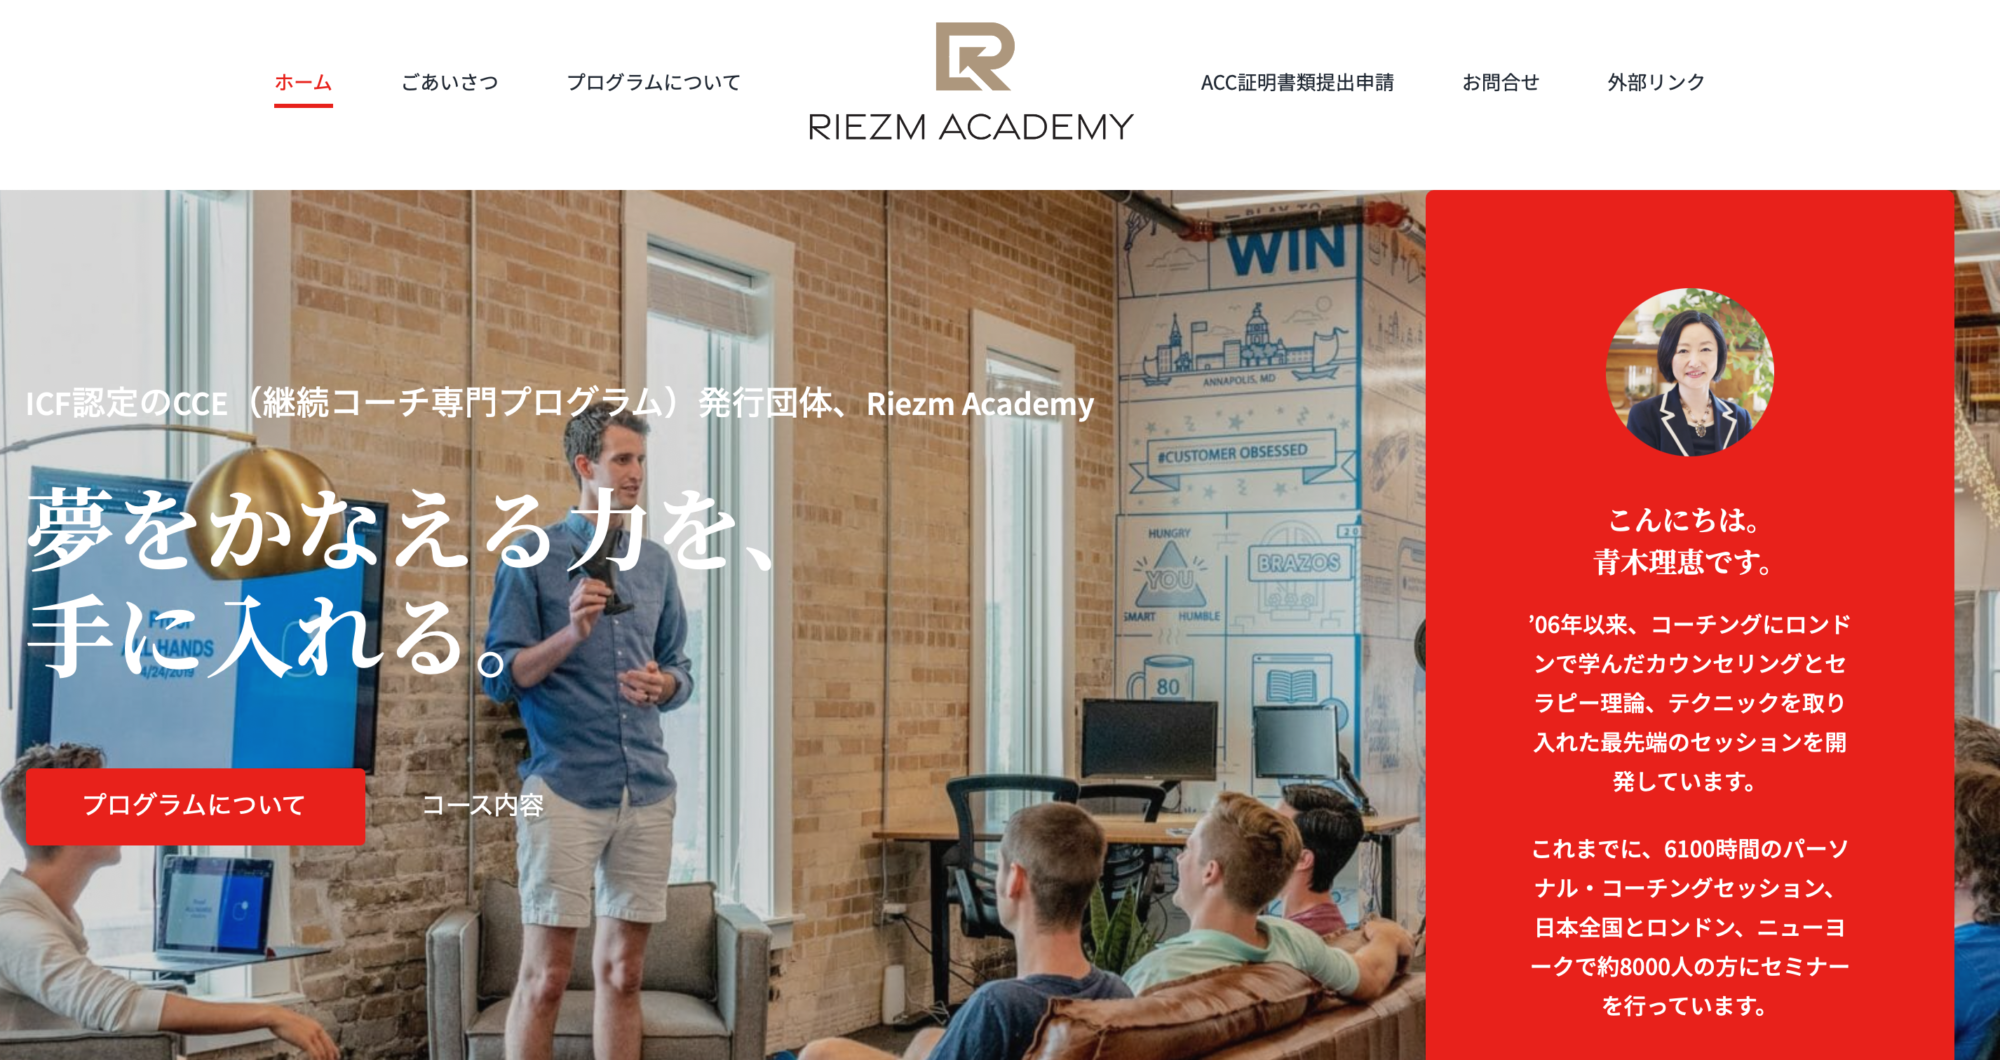 RIEZM Academy　誕生します  